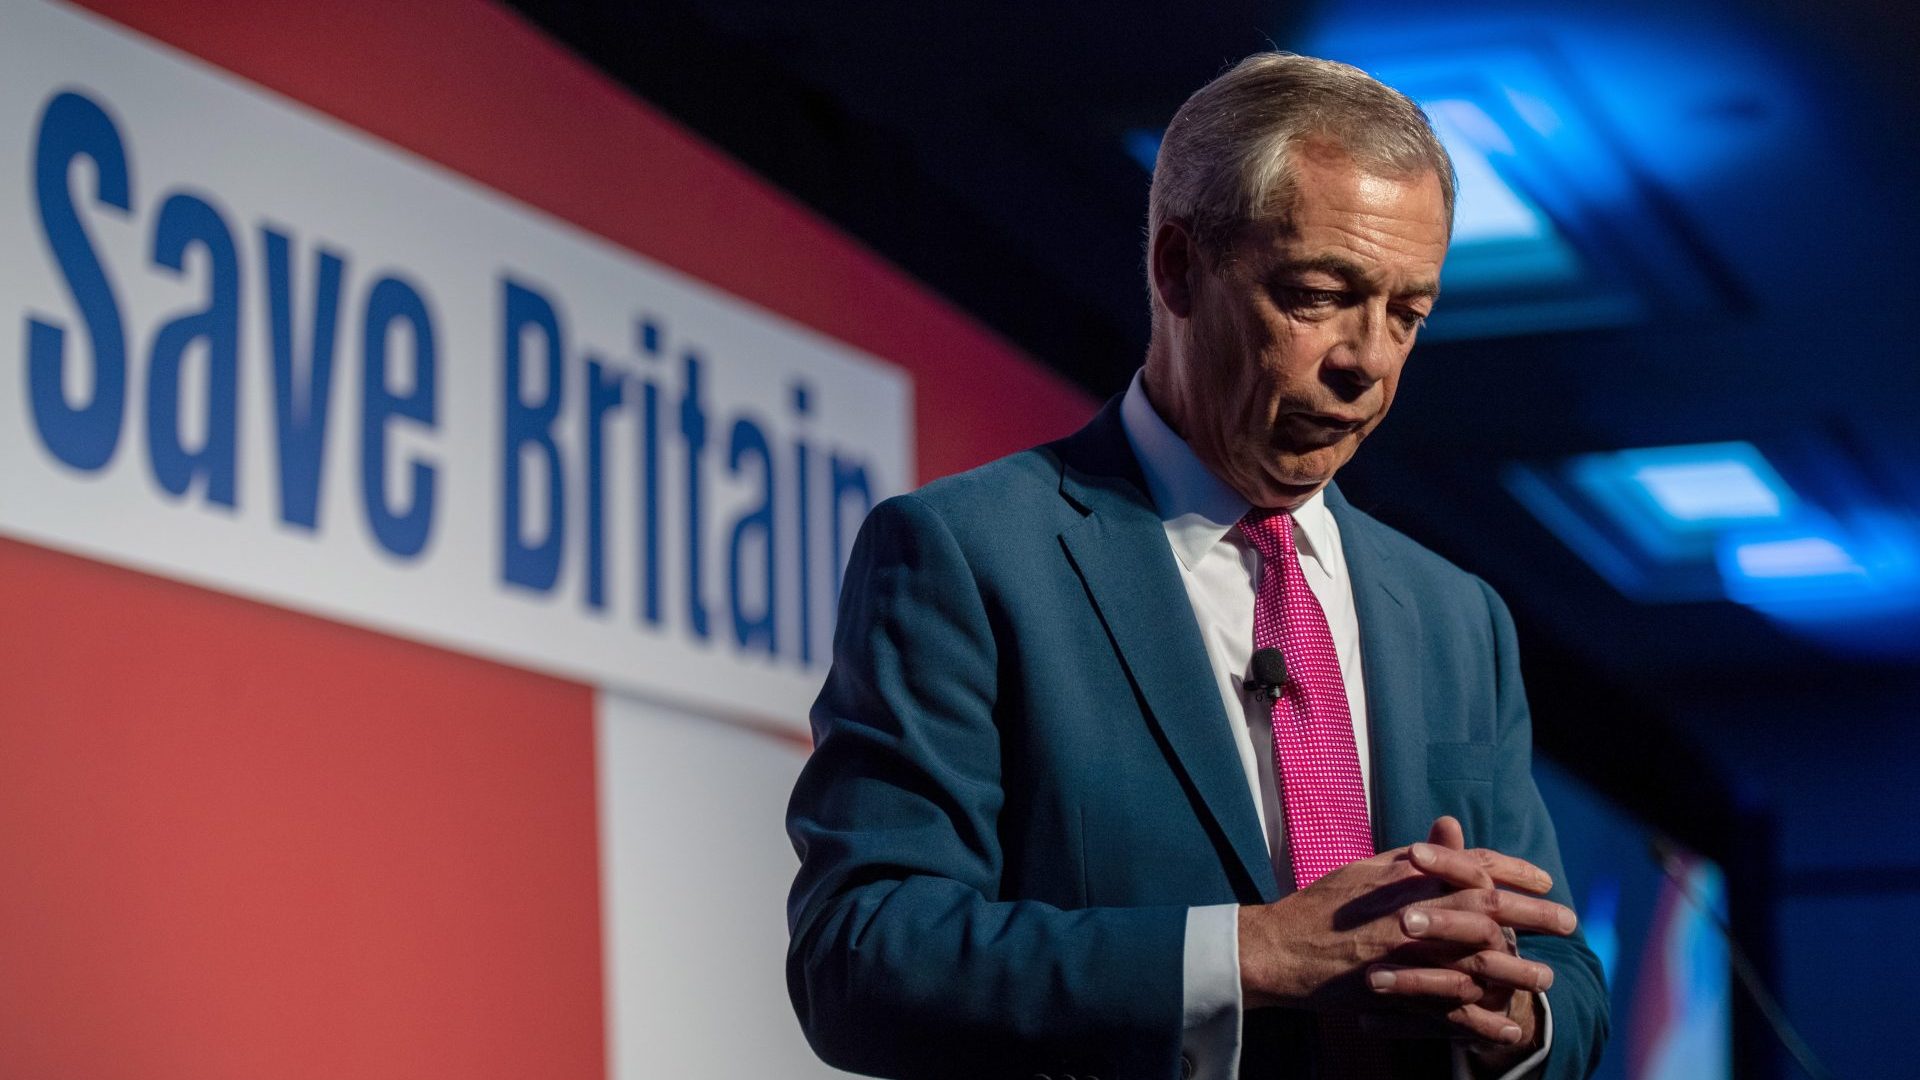 Nigel Farage, speaks at the Reform Party annual conference in October (Photo by Chris J Ratcliffe/Getty Images)